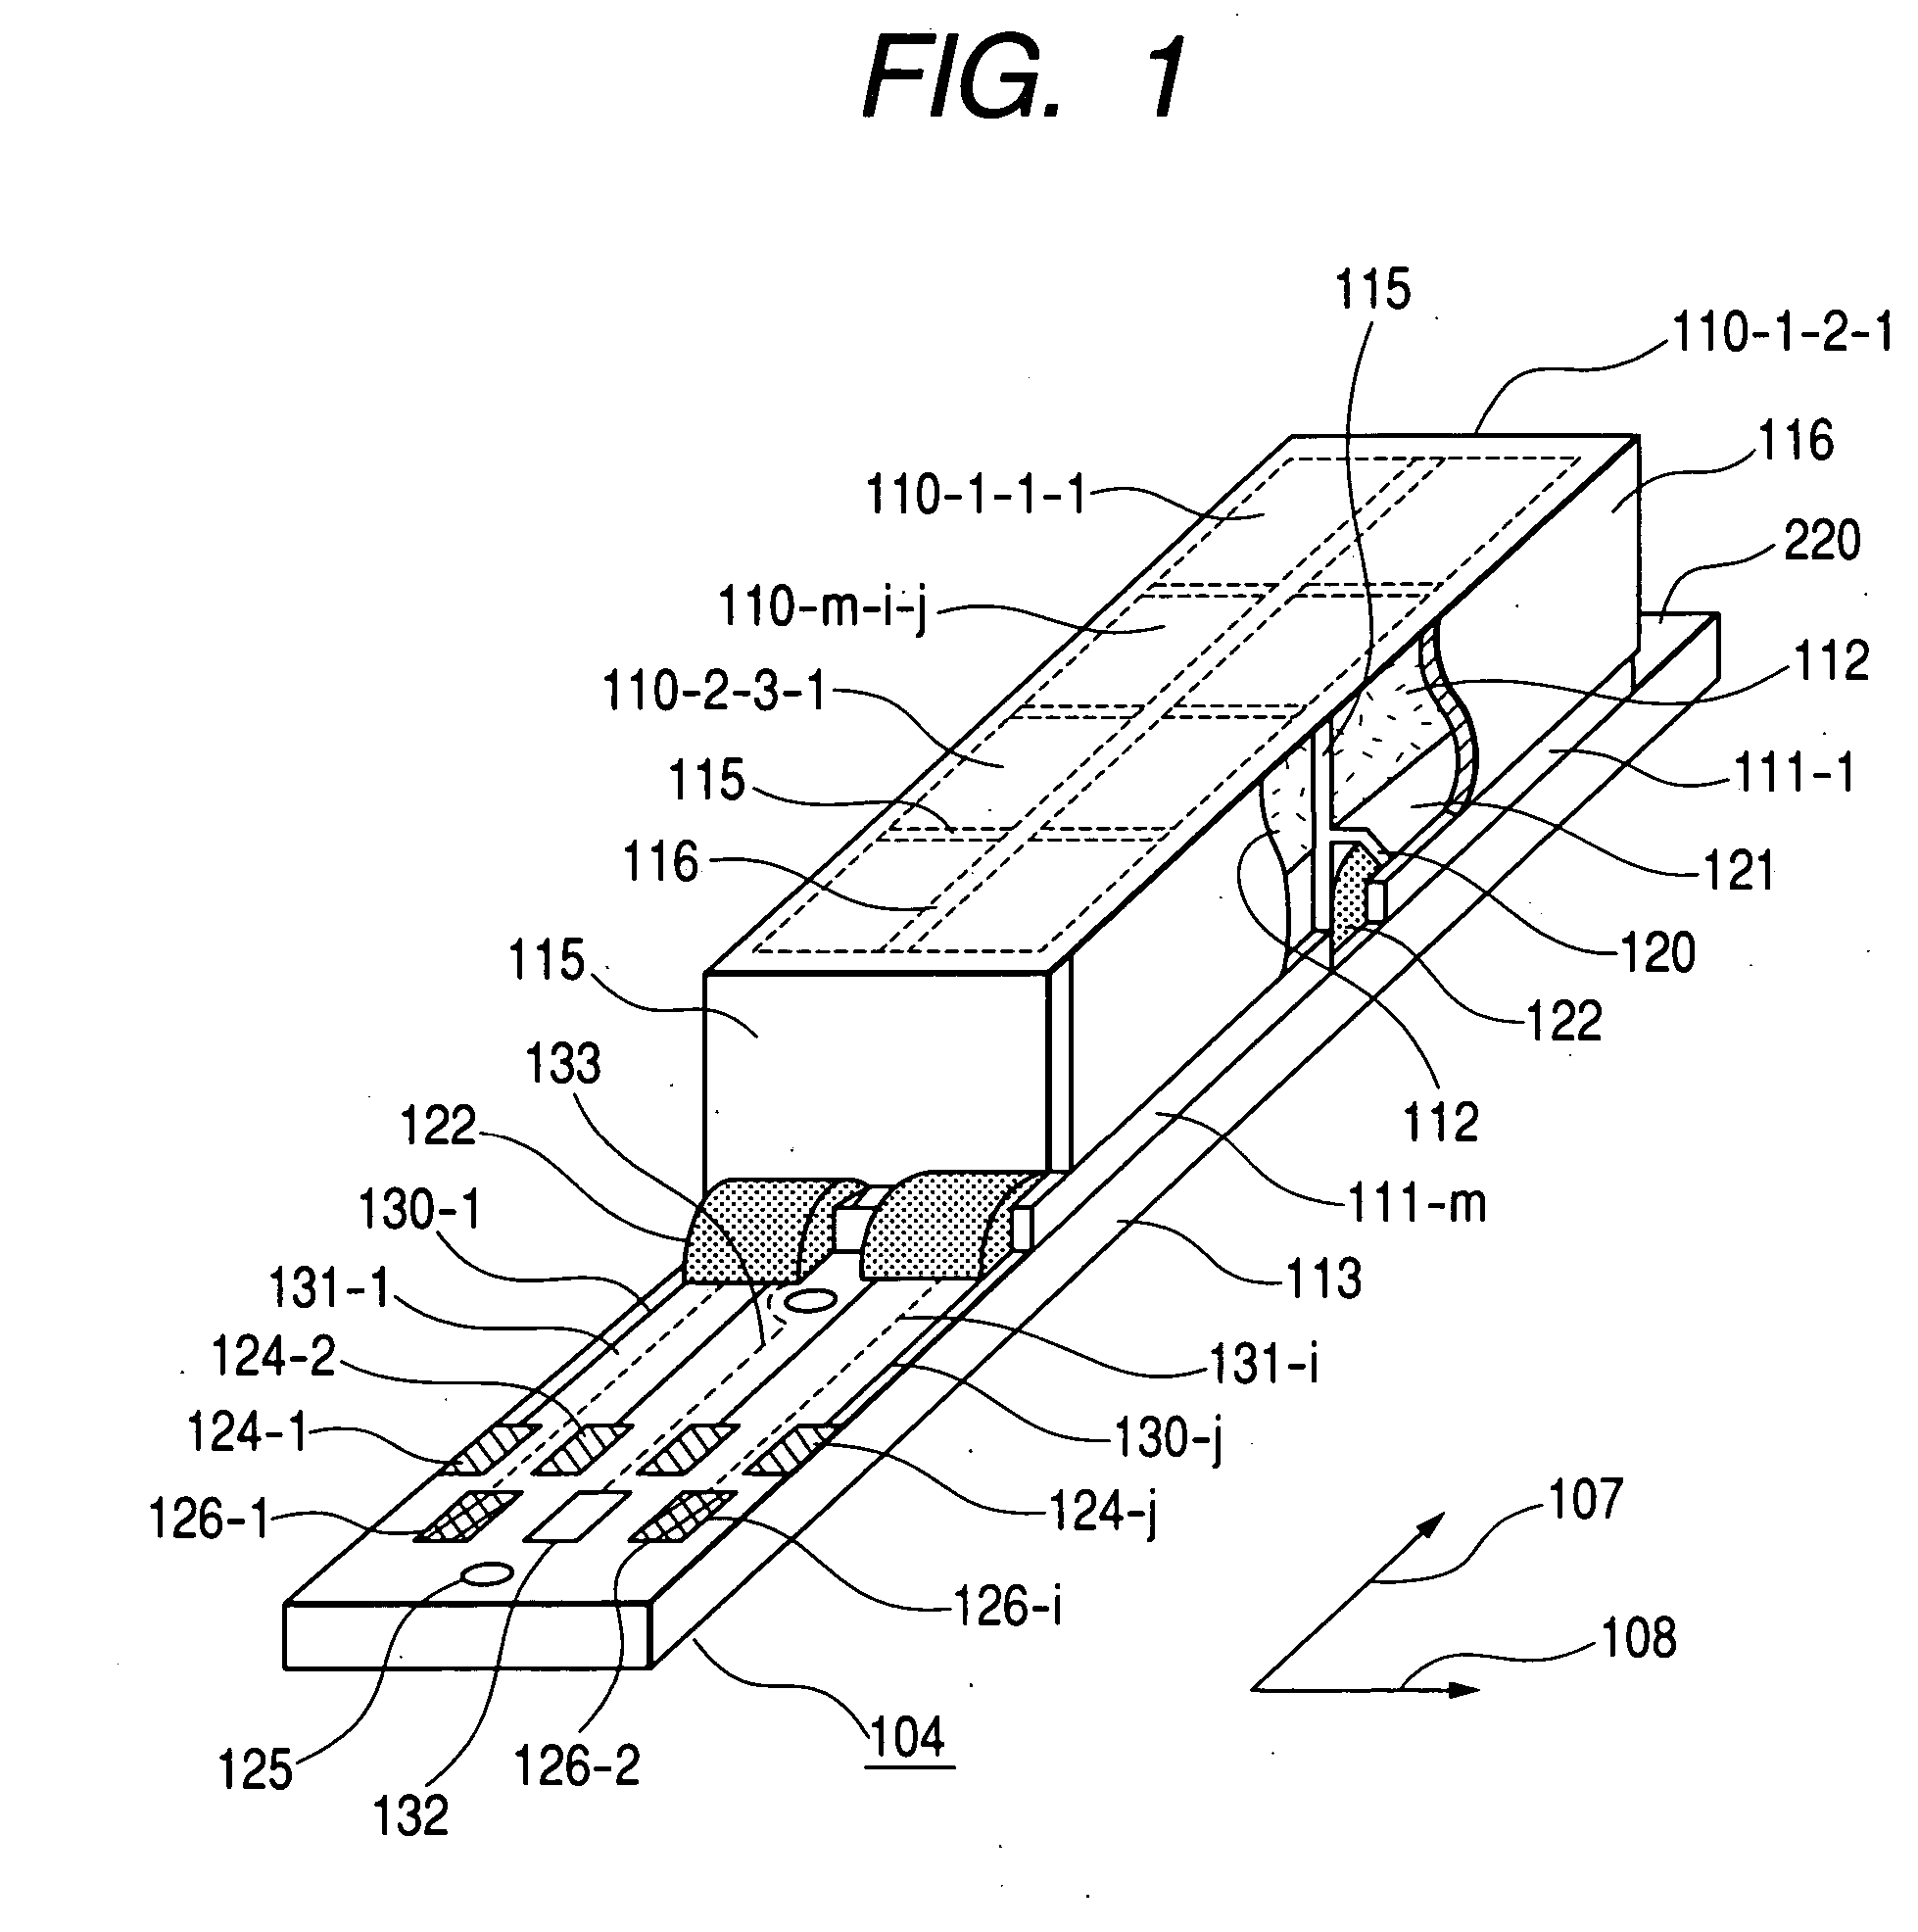 Xray detector having tiled photosensitive modules and Xray system